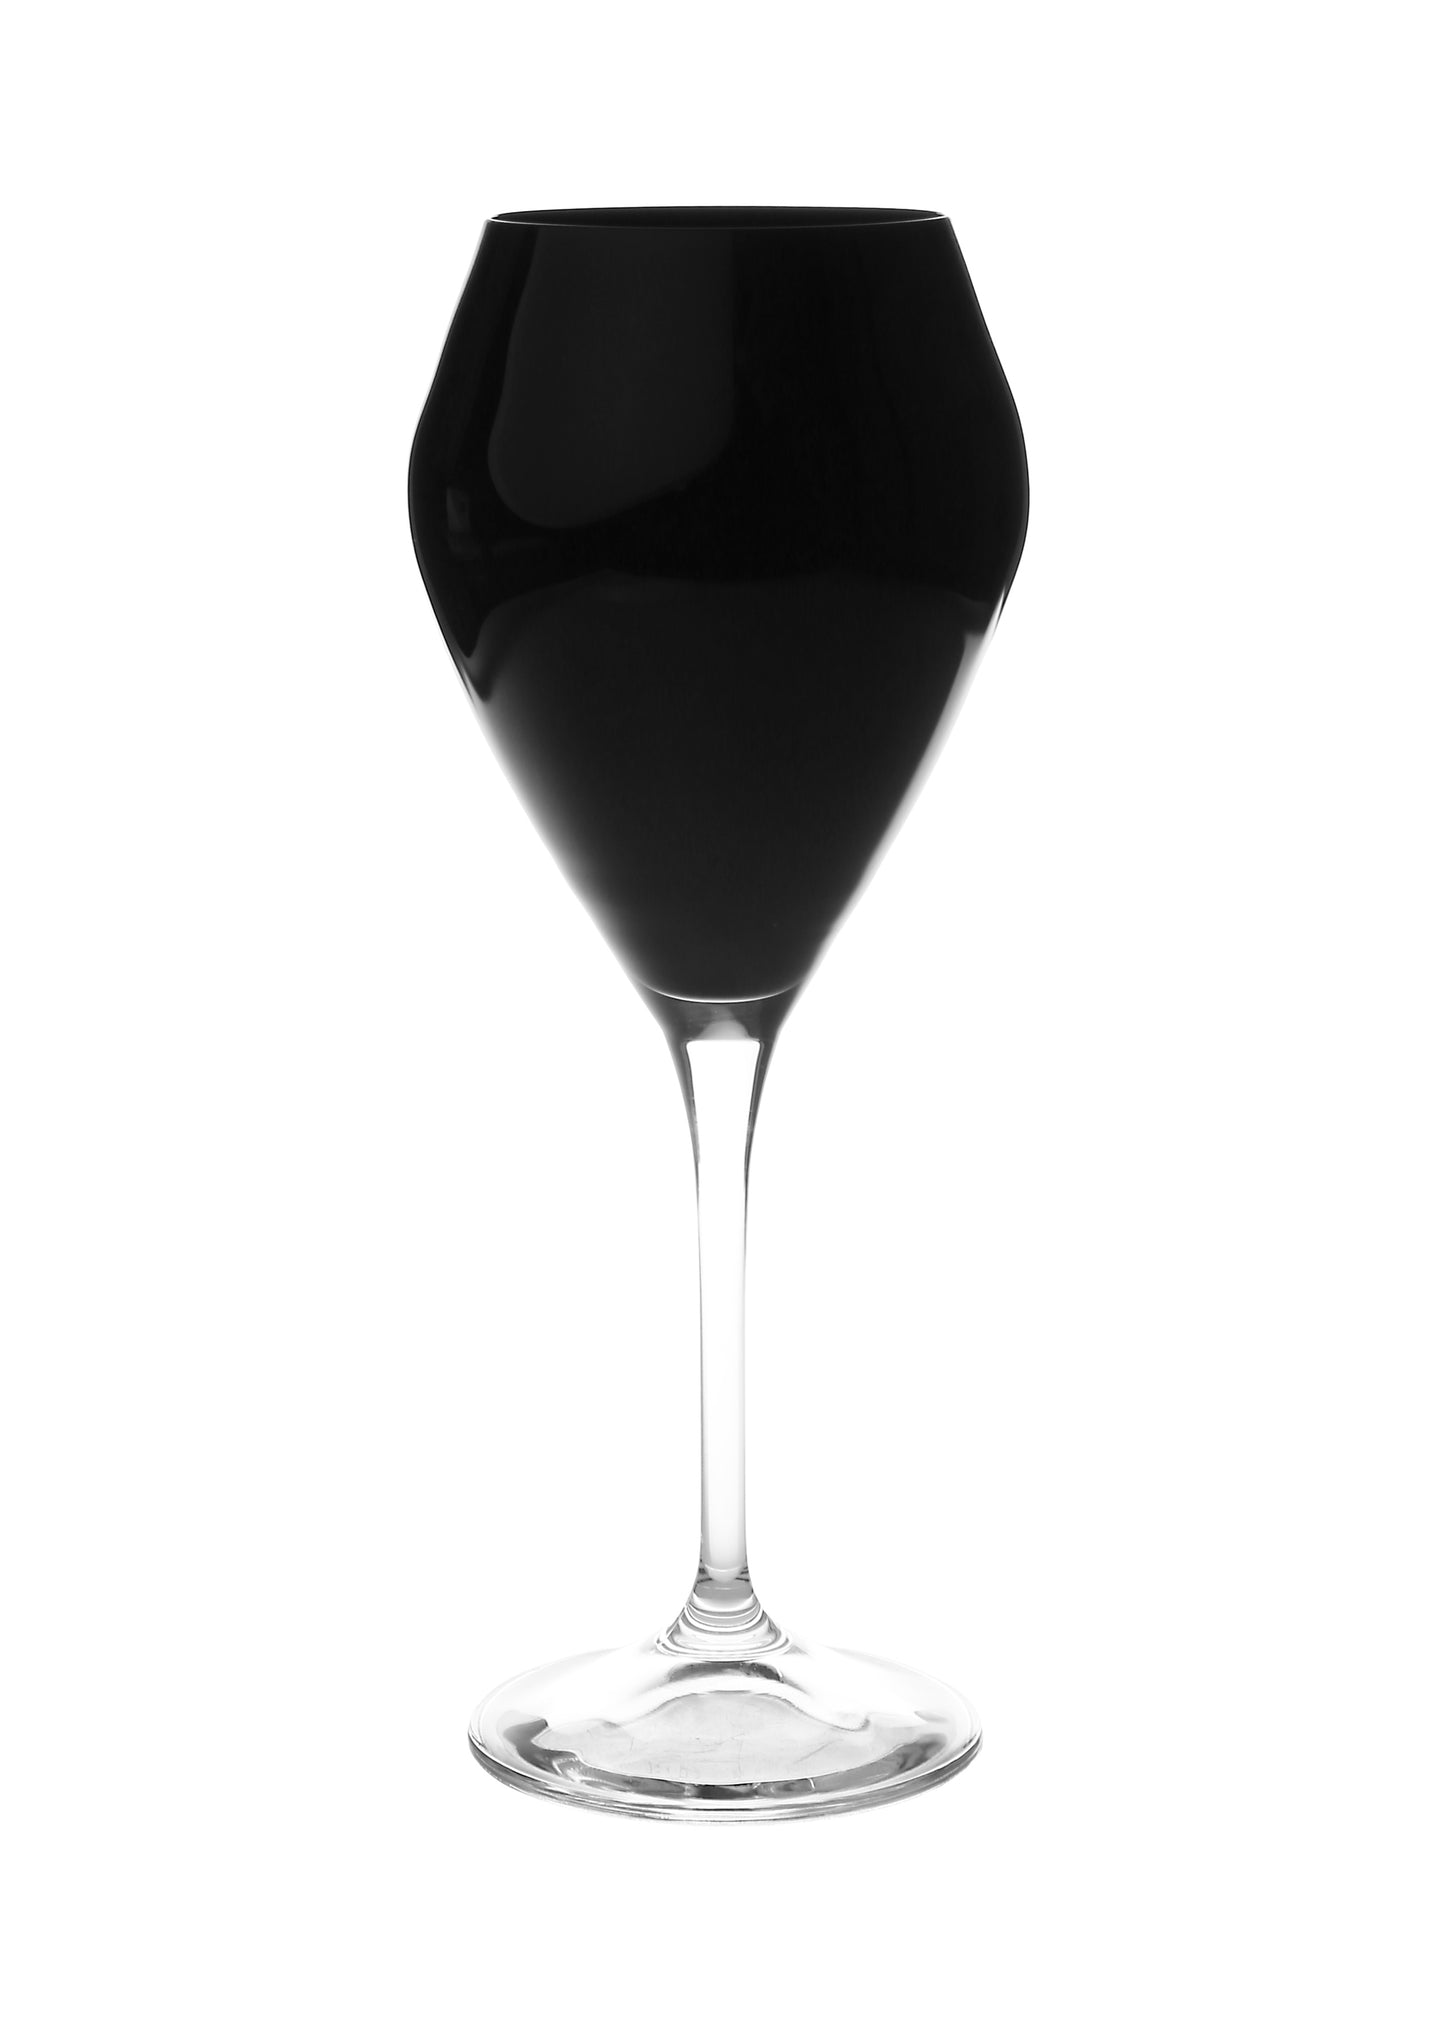 Set of 6 Black V-Shaped Water Glasses with Clear Stem